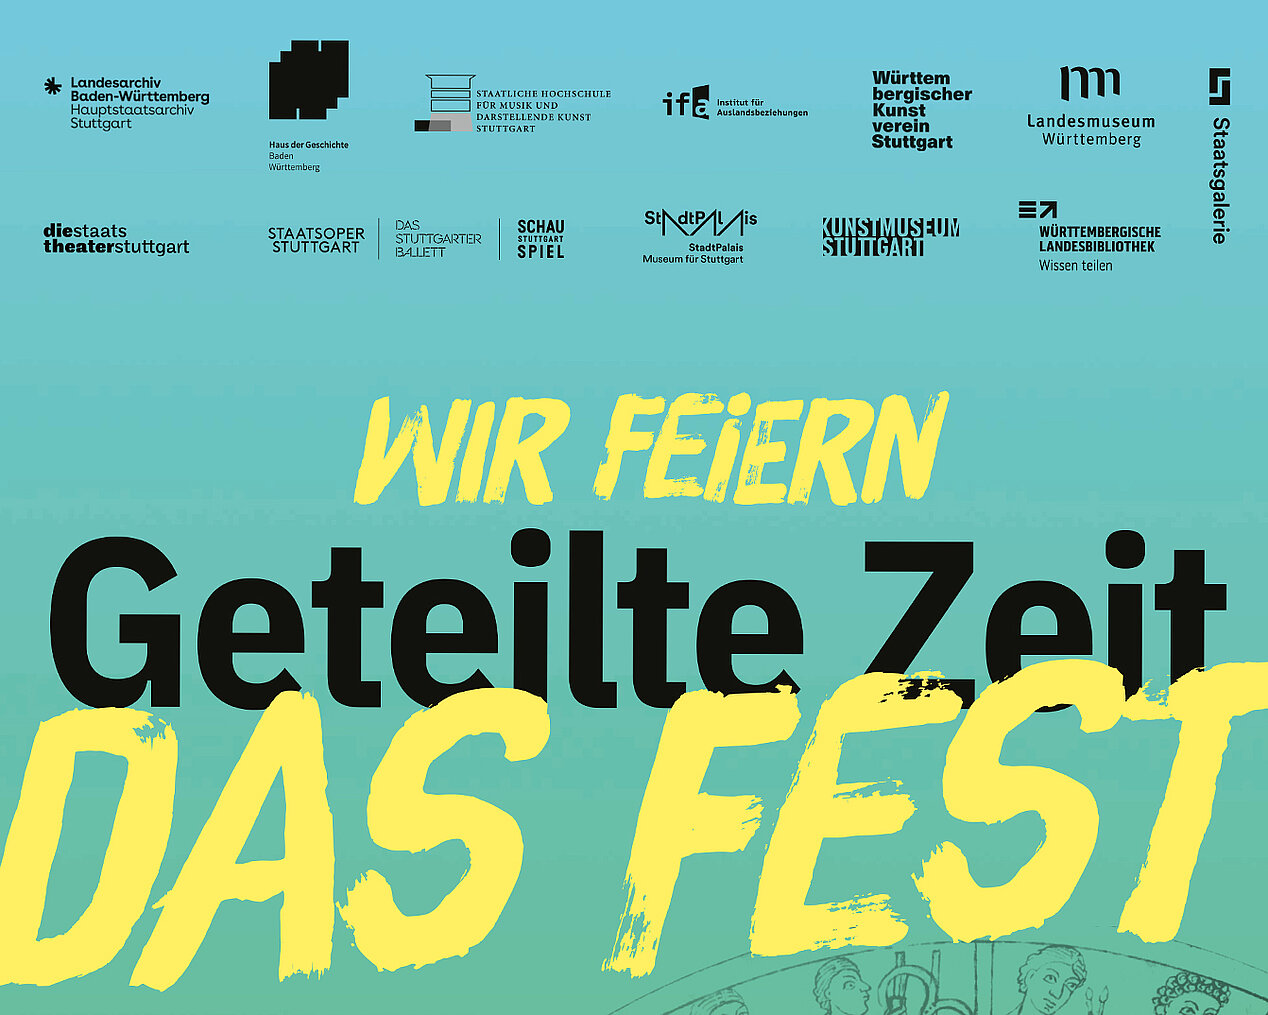 Poster with turquoise background. Smaller lettering at the back in yellow: WIR FEIERN. Larger in black in front: Geteilte Zeit. And at the bottom of the picture, large in yellow: DAS FEST.